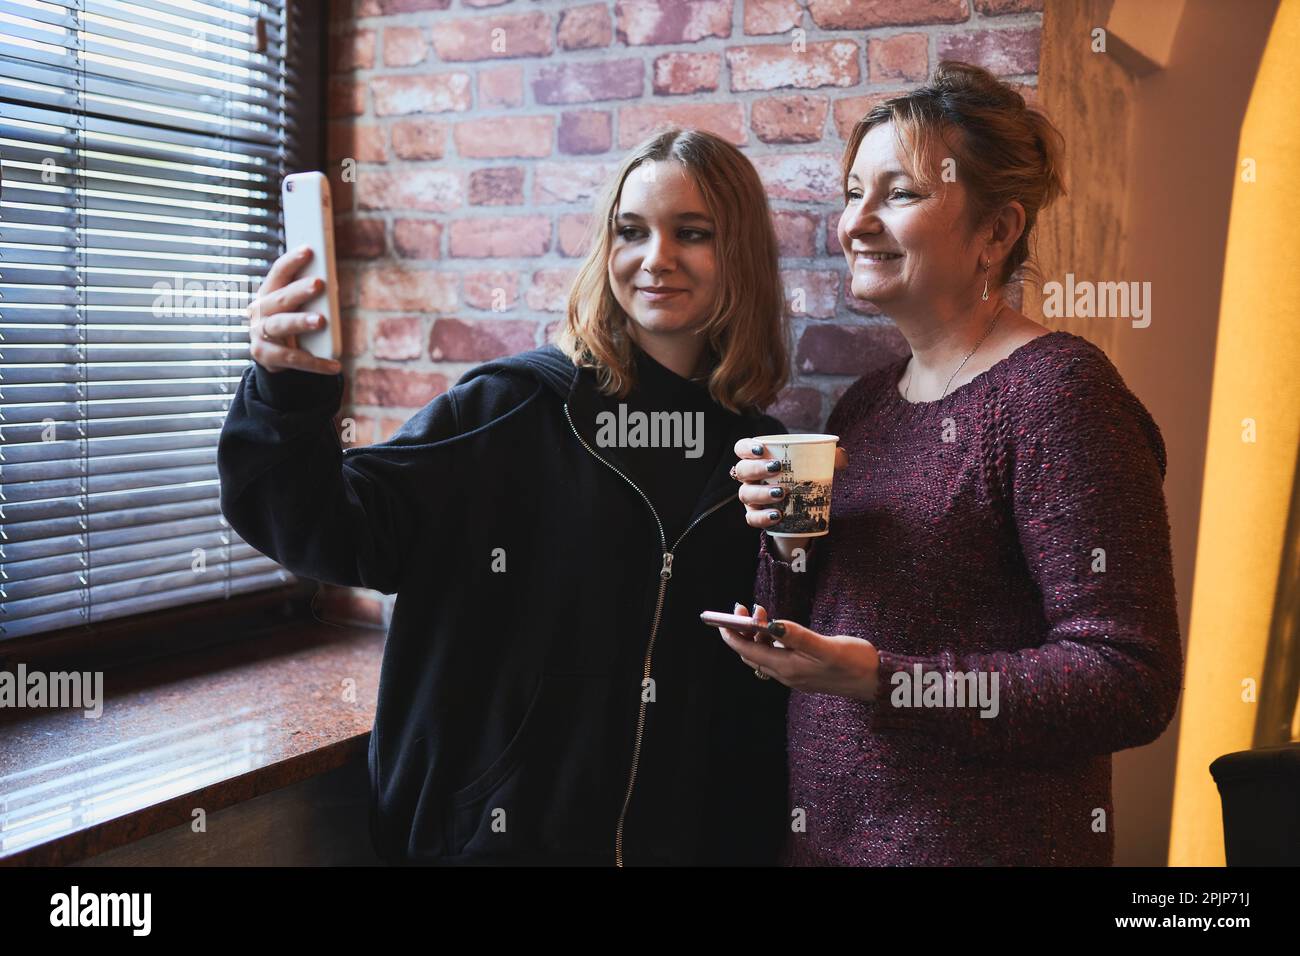 Women making video call on mobile phone.  Taking selfie photo using smartphone. Connecting remotely with family and friends Stock Photo